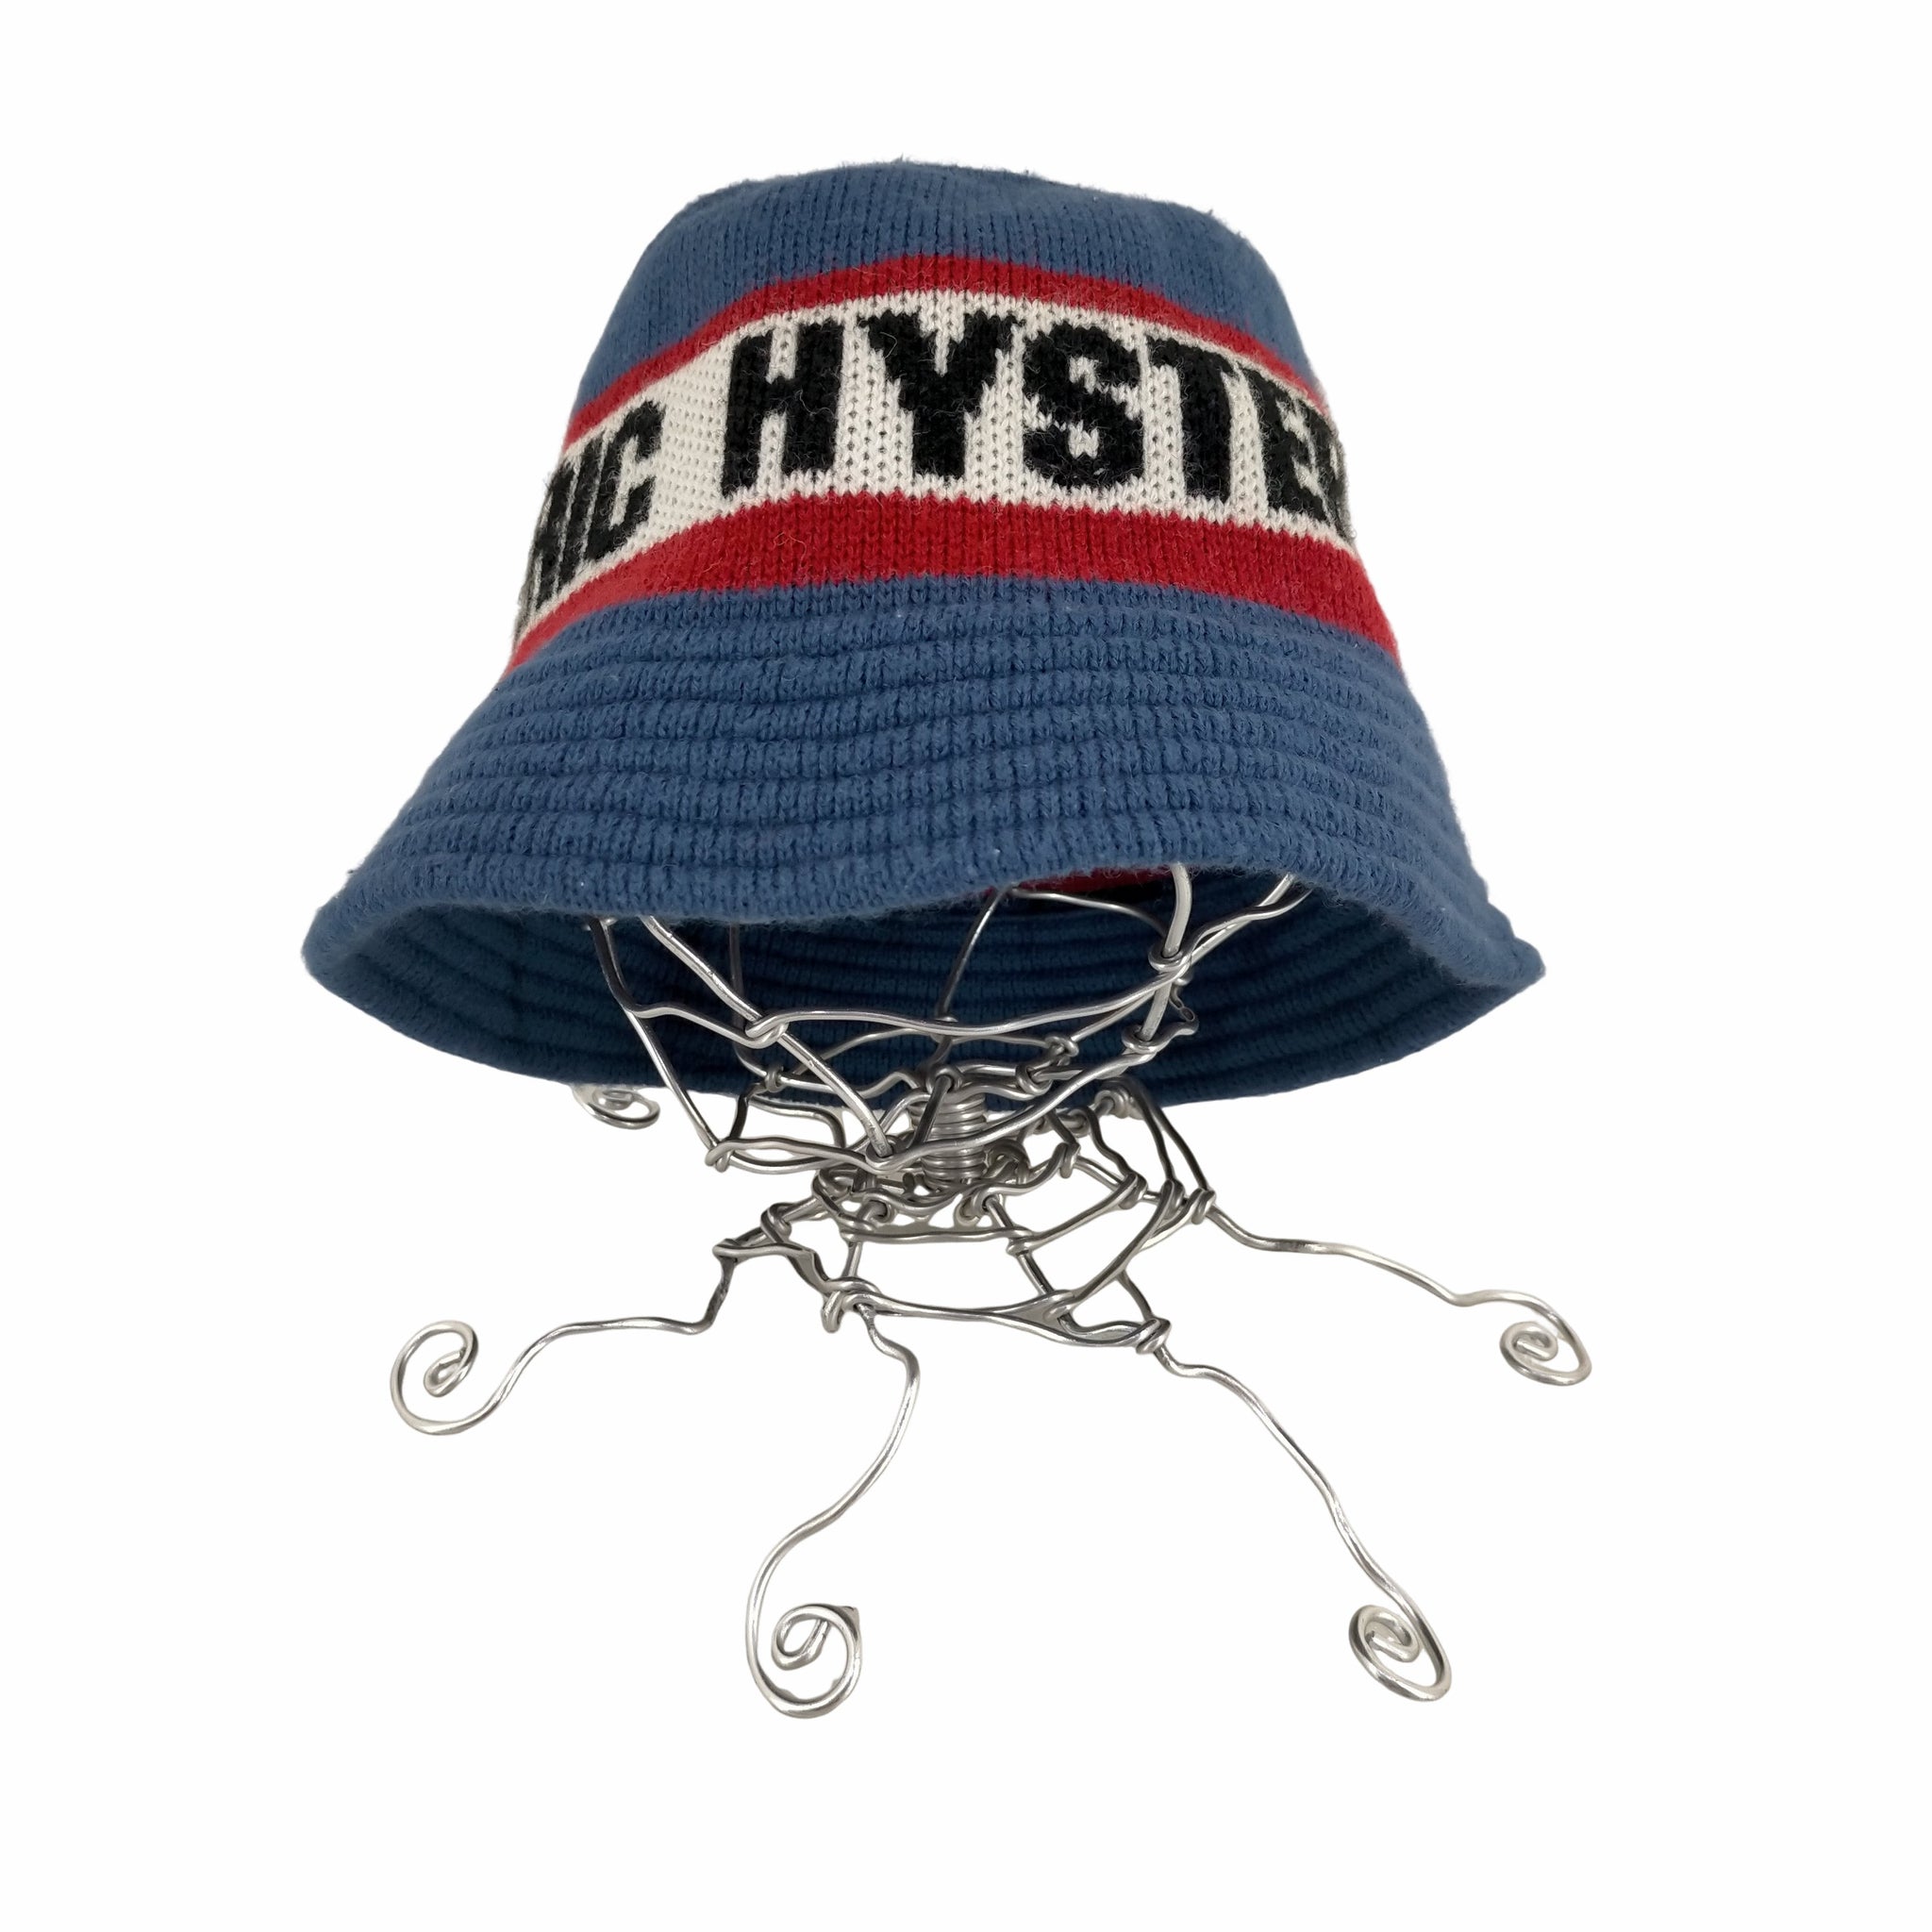 HYSTERIC GLAMOUR(ヒステリックグラマー)HYSTERIC LOGO ニットバケット